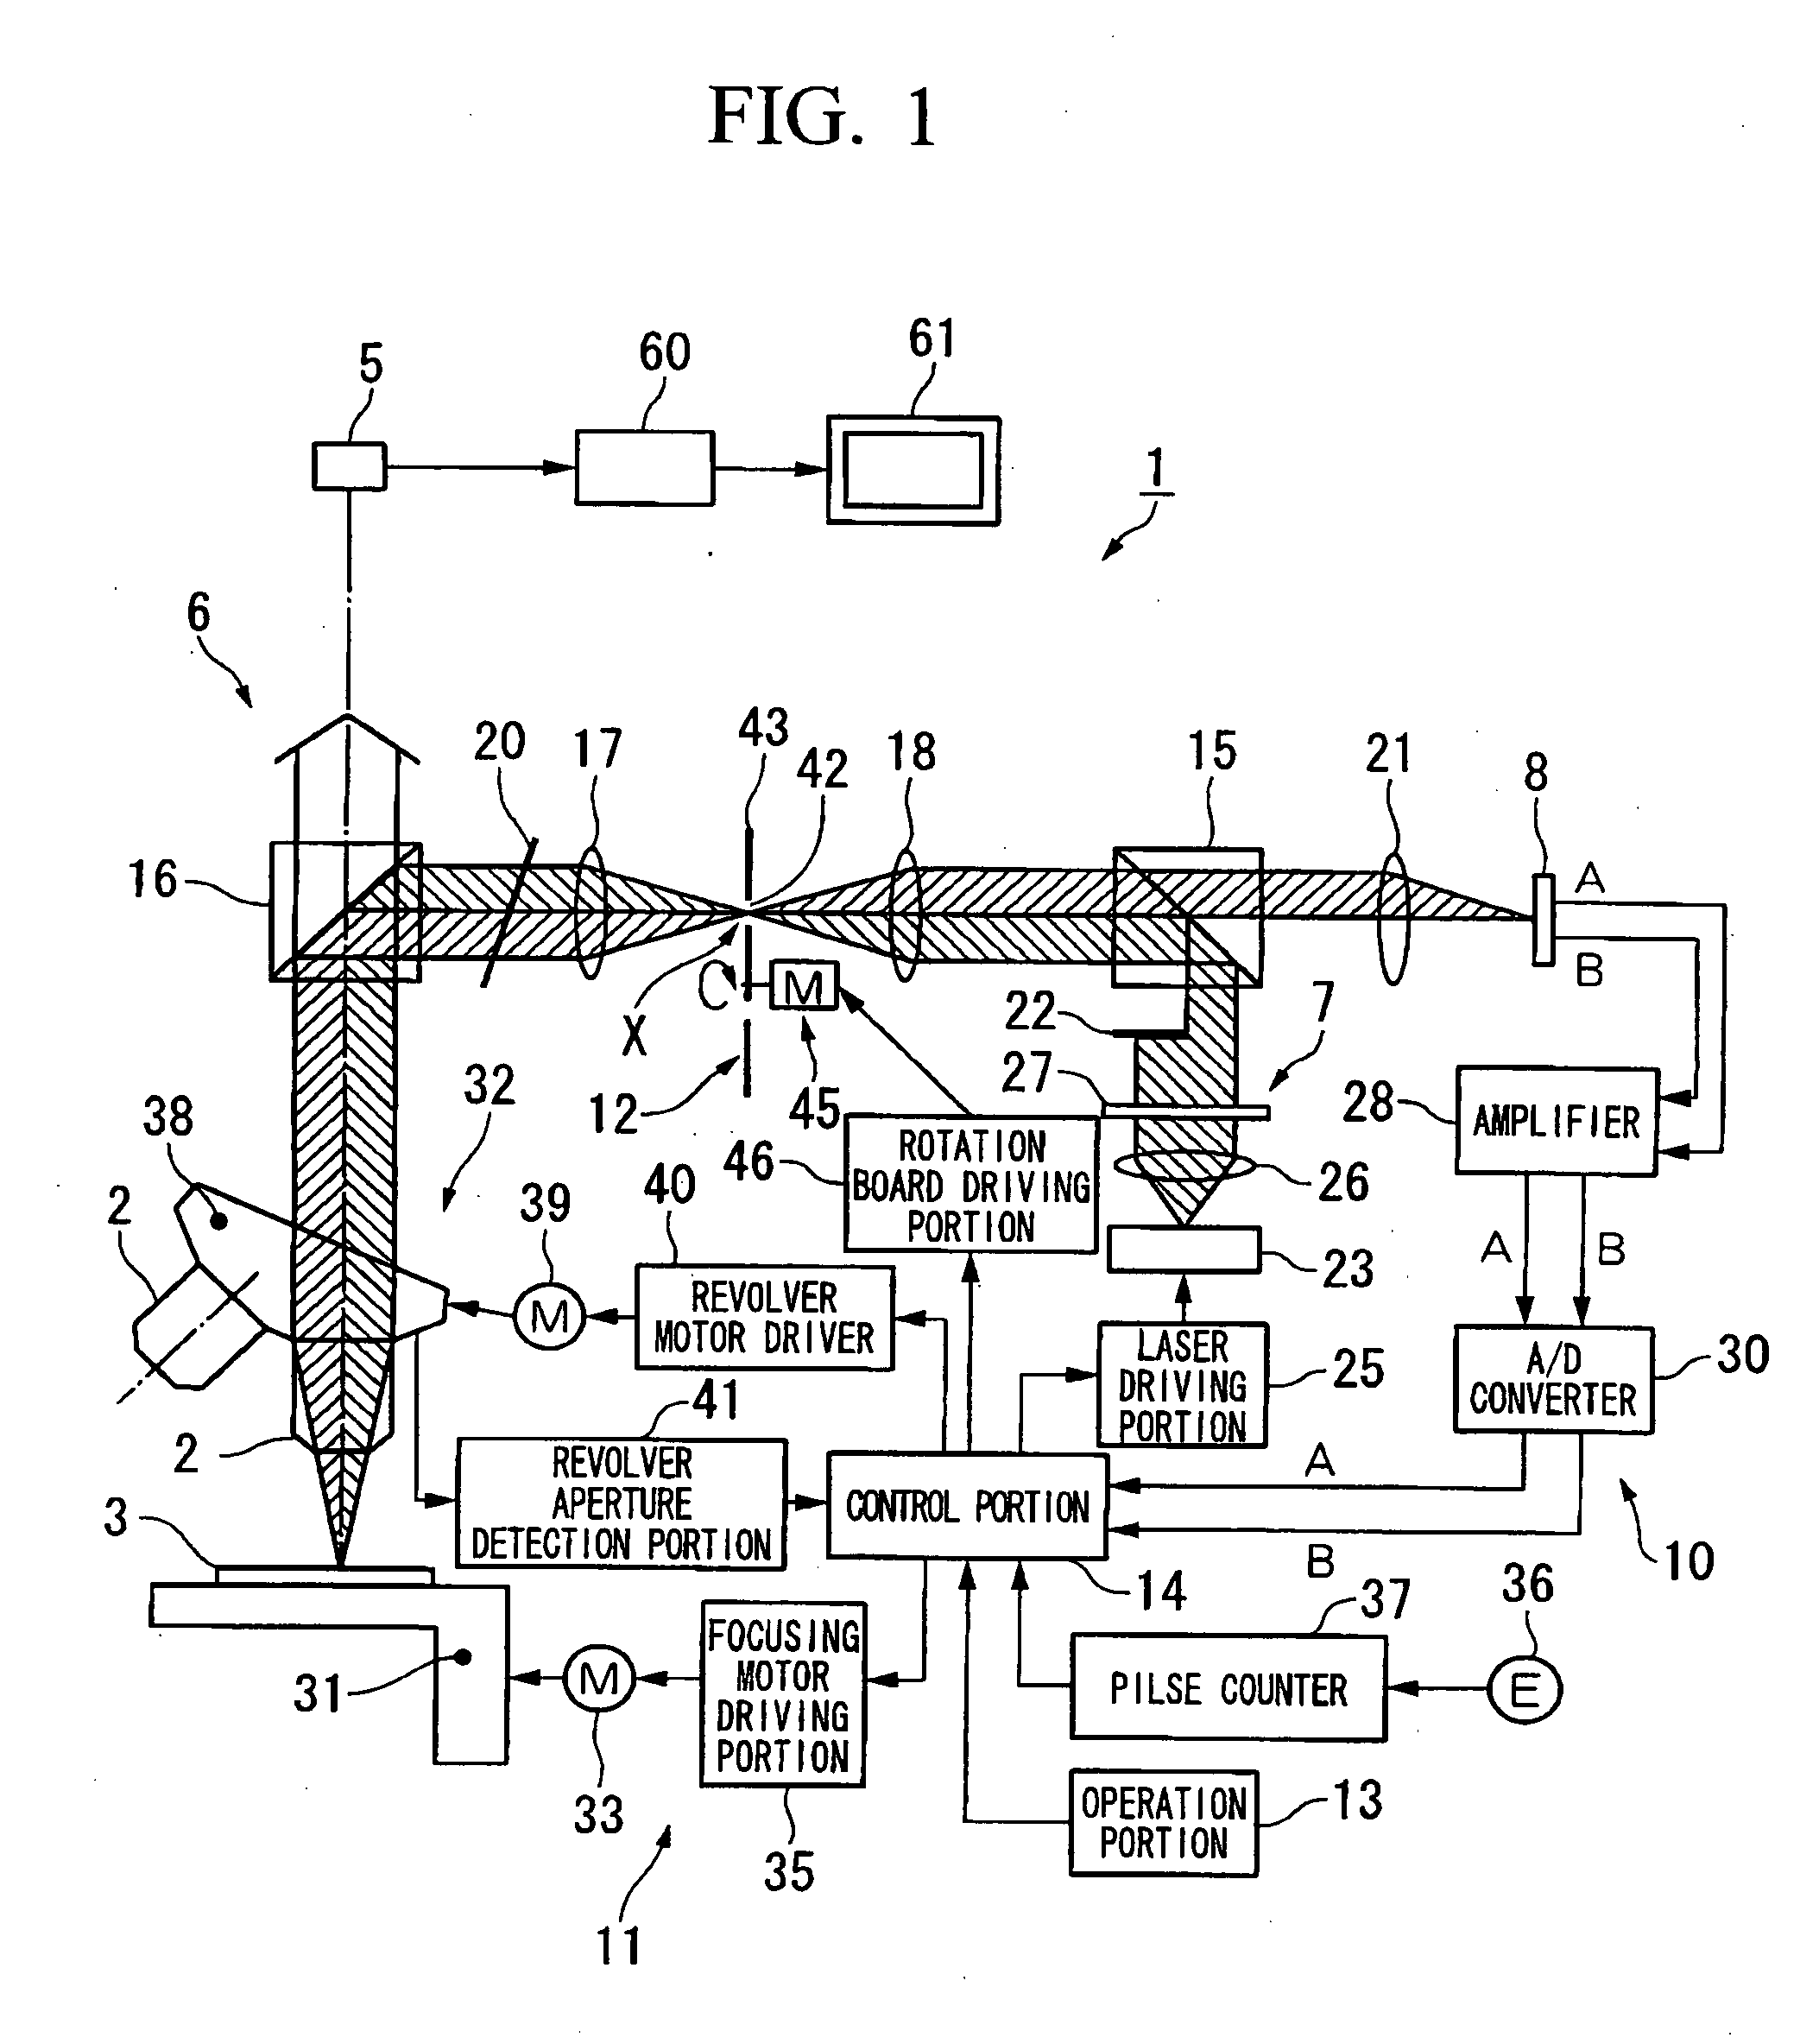 Observation apparatus with focal position control mechanism